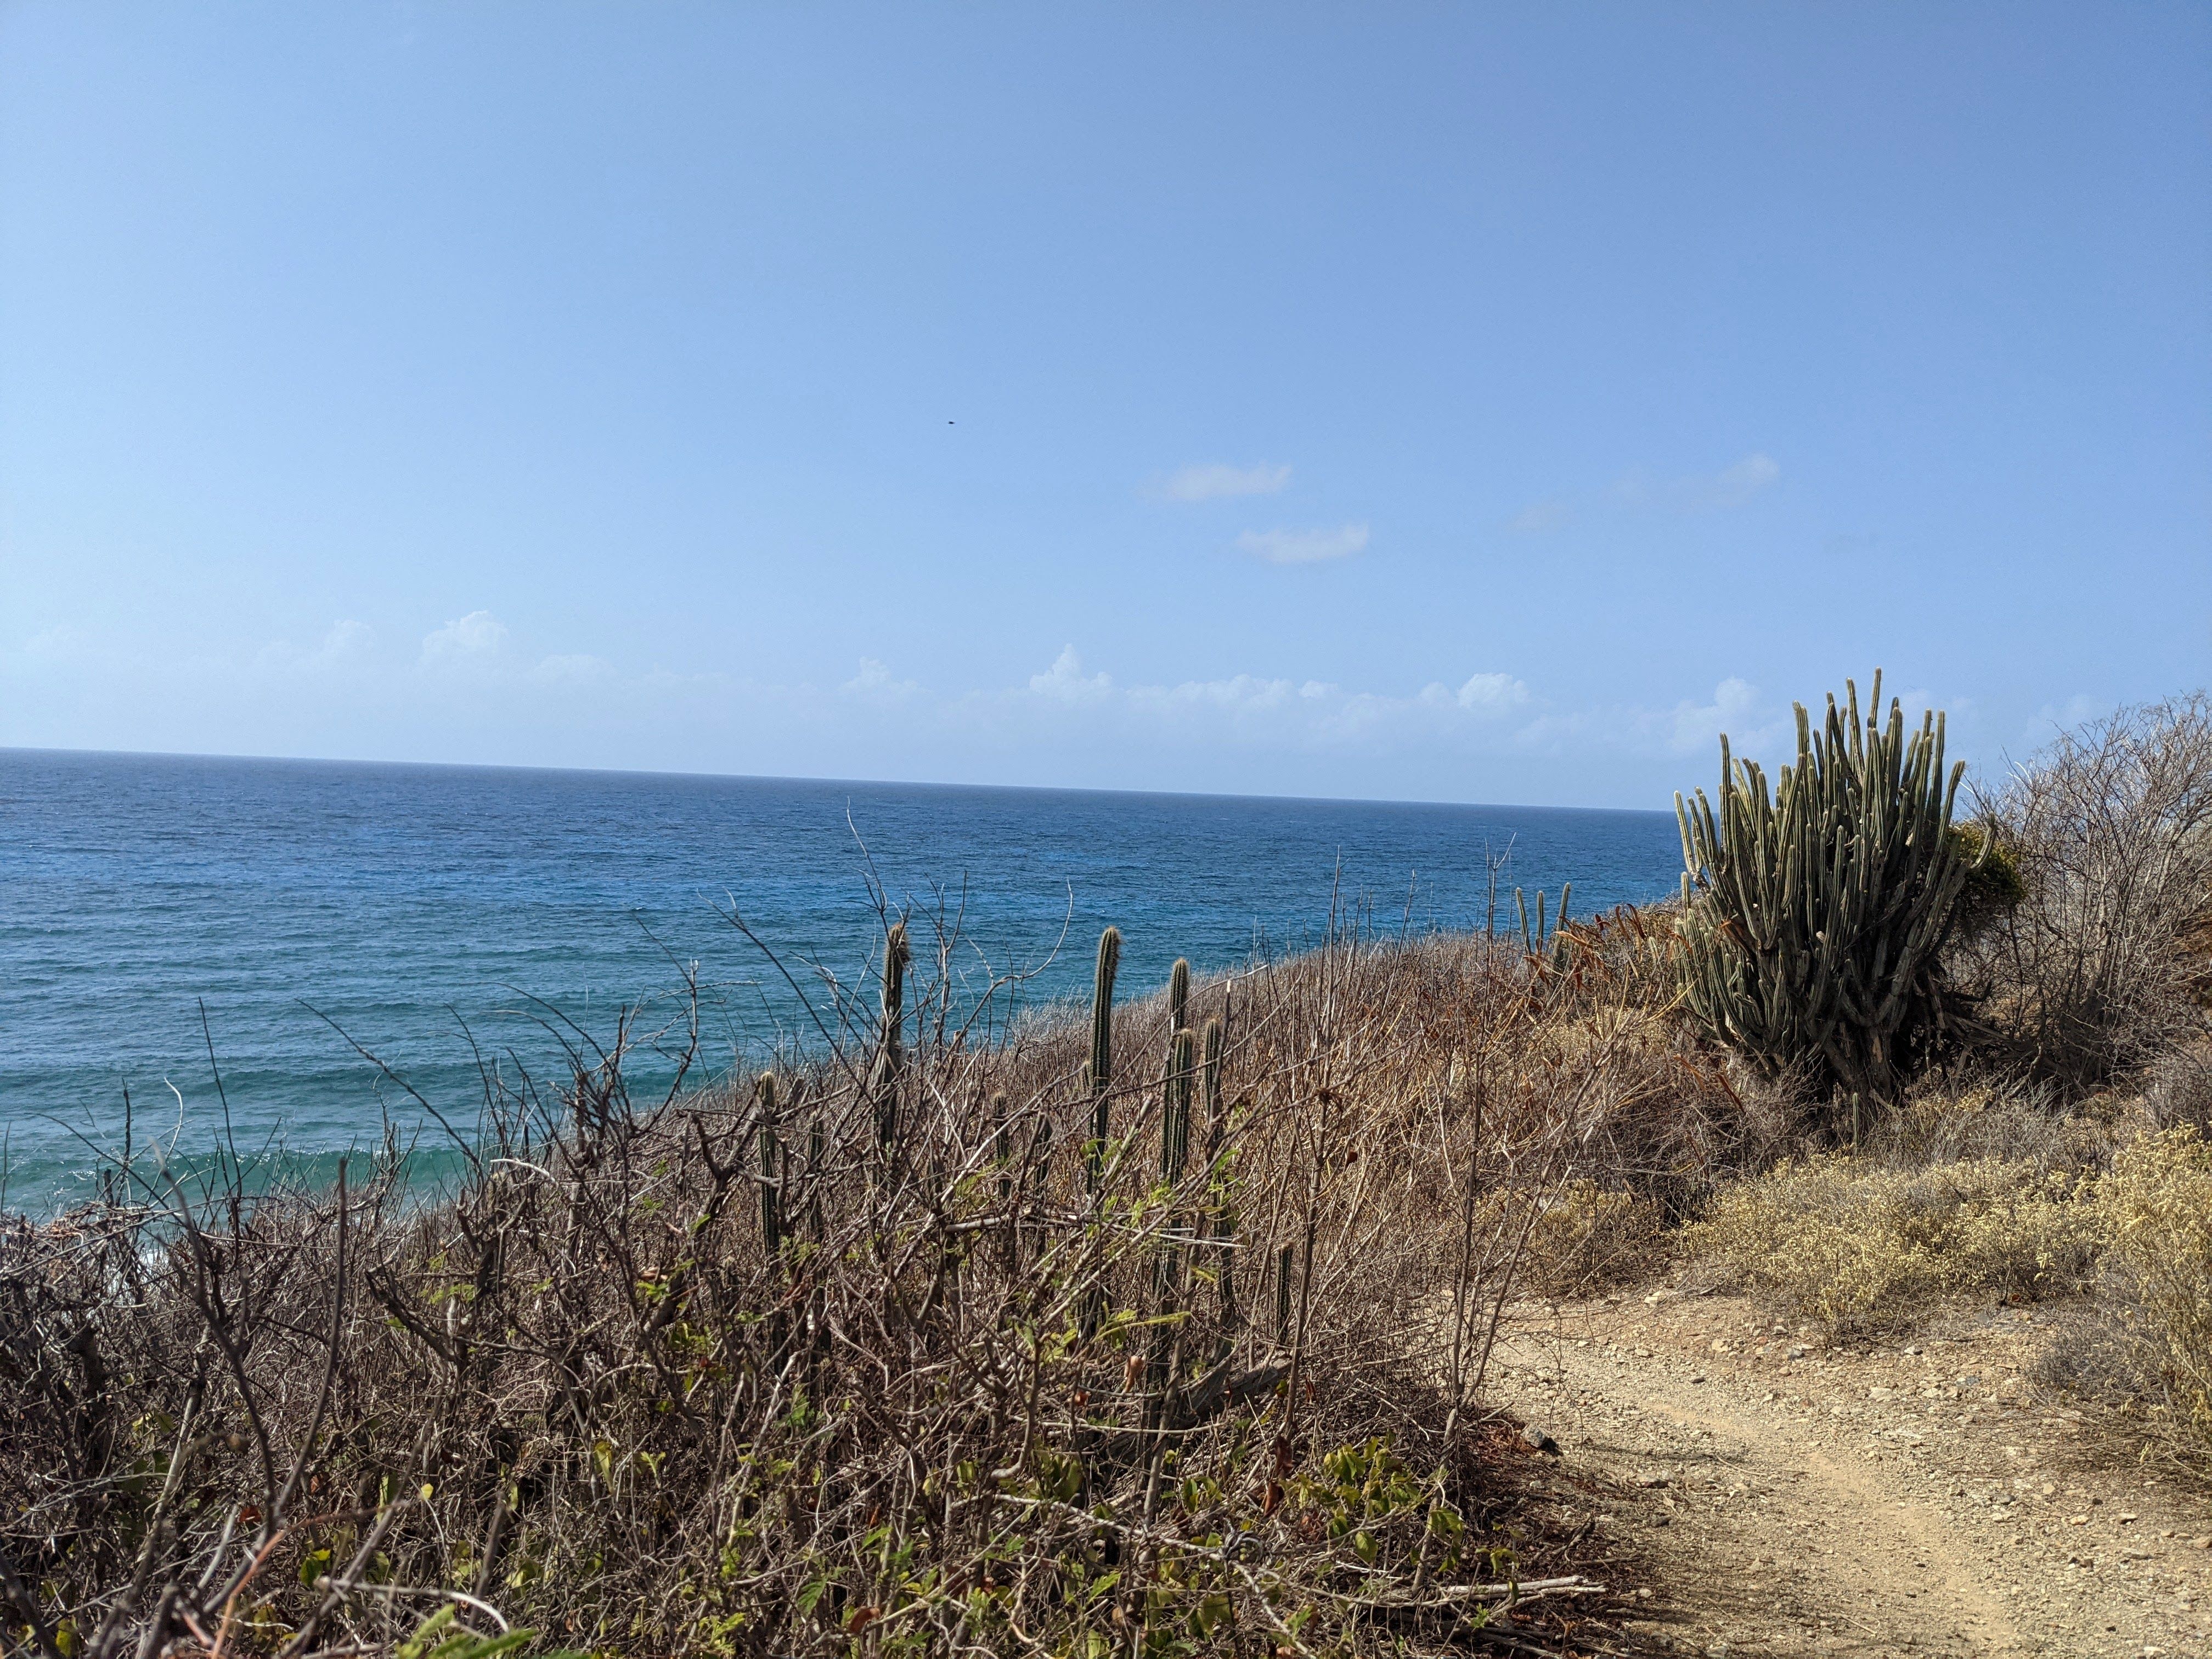 A cliff with a cactus which overlooks the Atlantic ocean from somewhere in St. Croix.